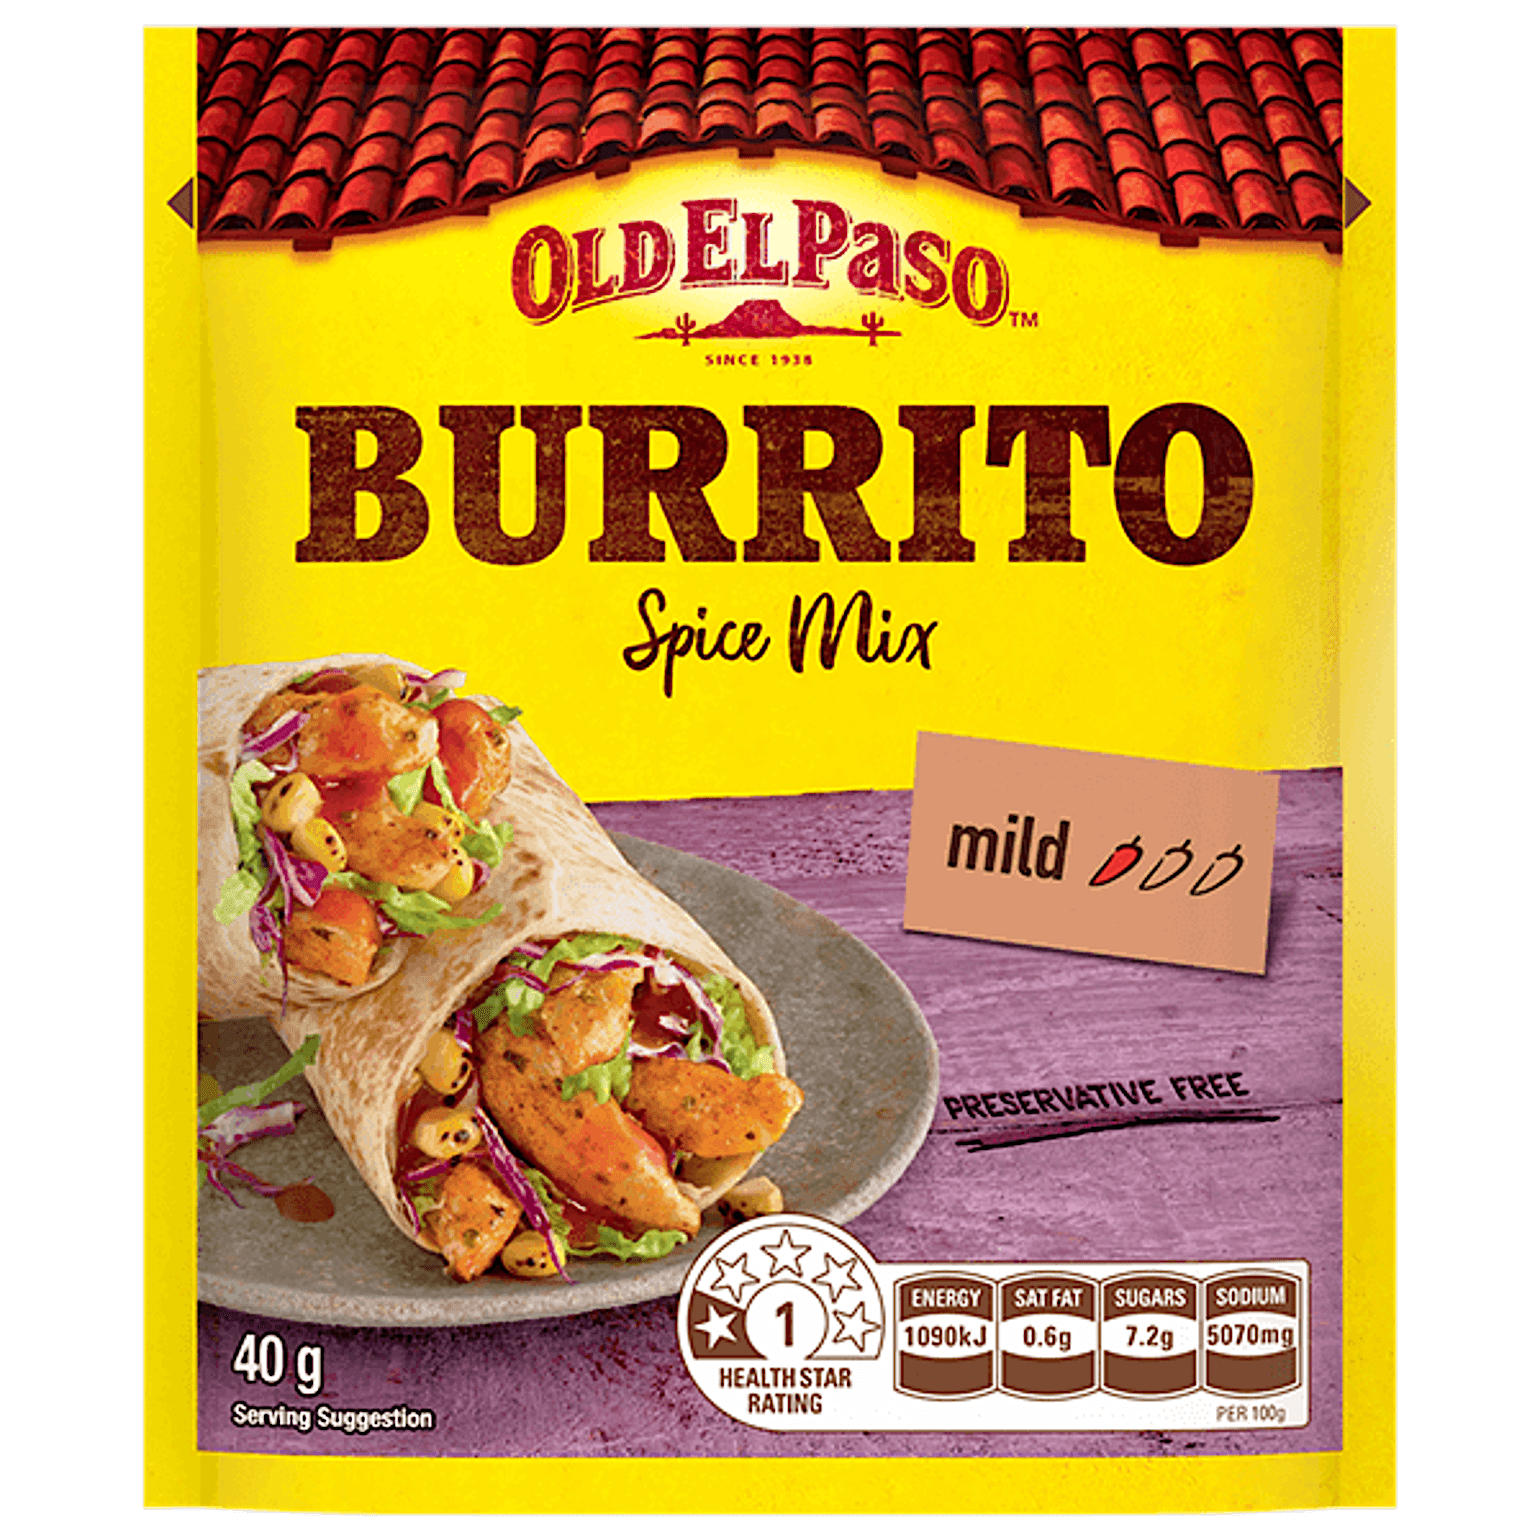 a pack of Old El Paso's mild burrito spice mix (40g)